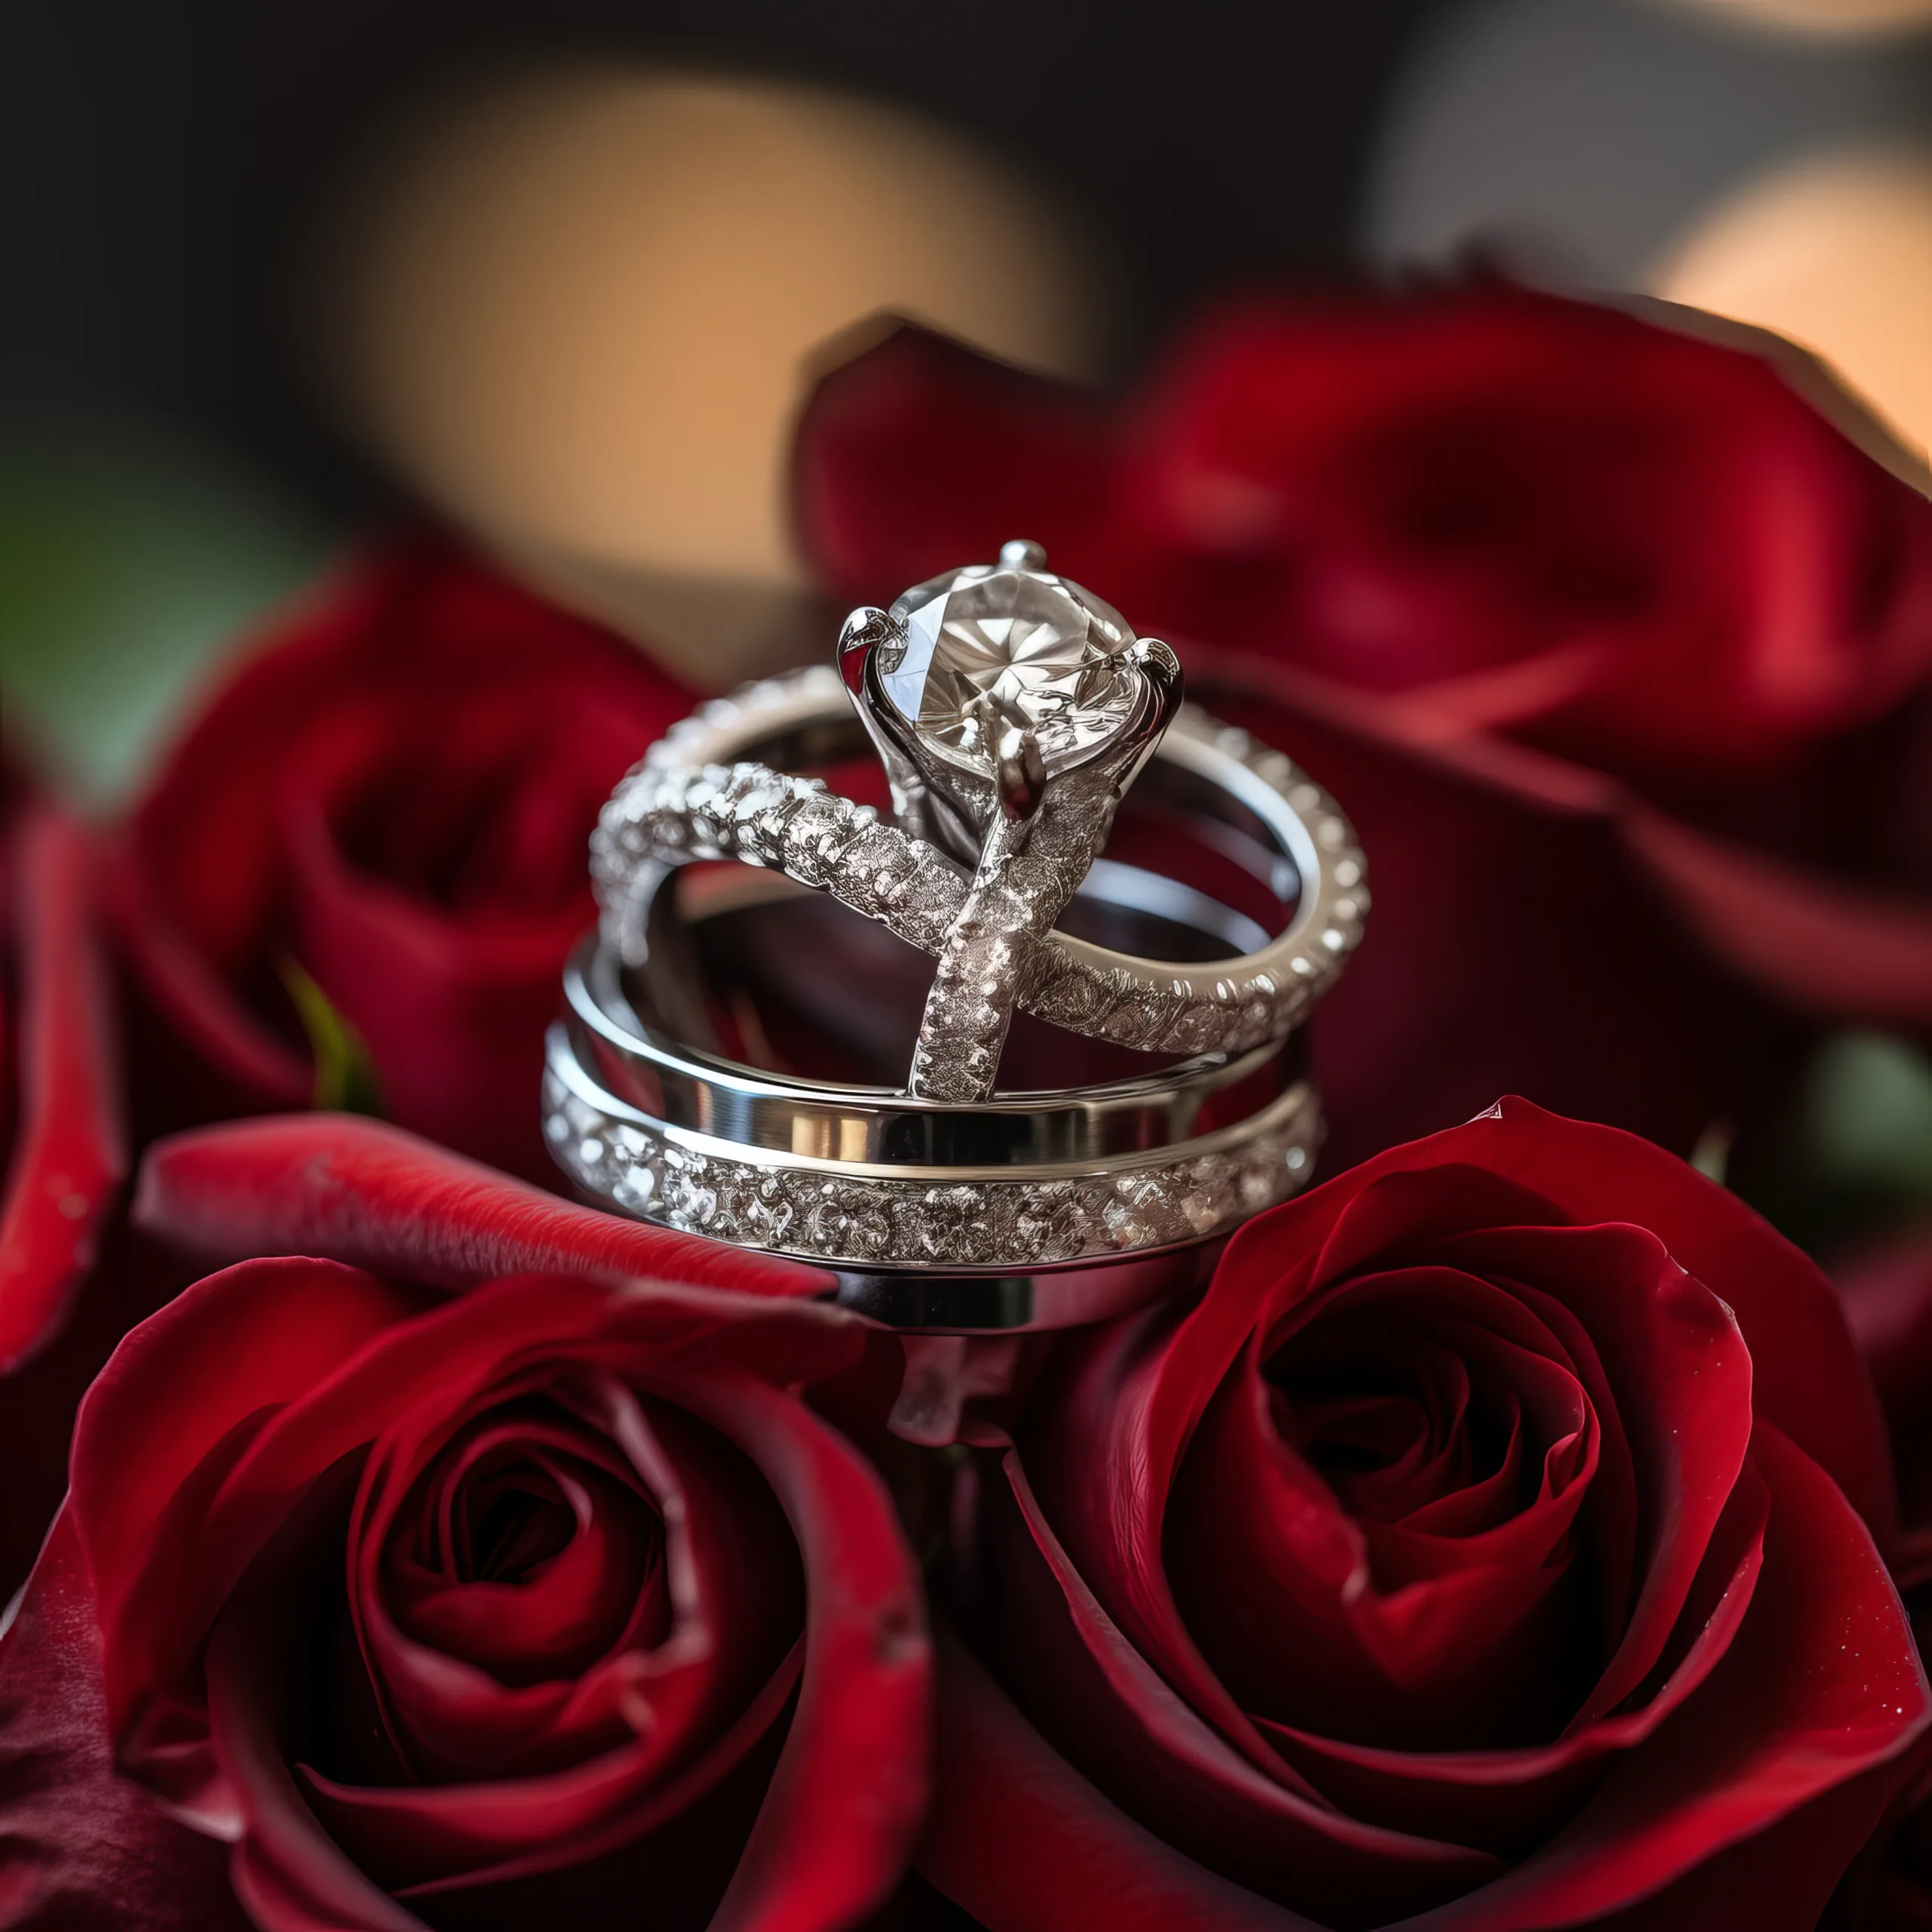 Wick farm Photographer:A bouquet of roses and wedding rings needing safeguarding.